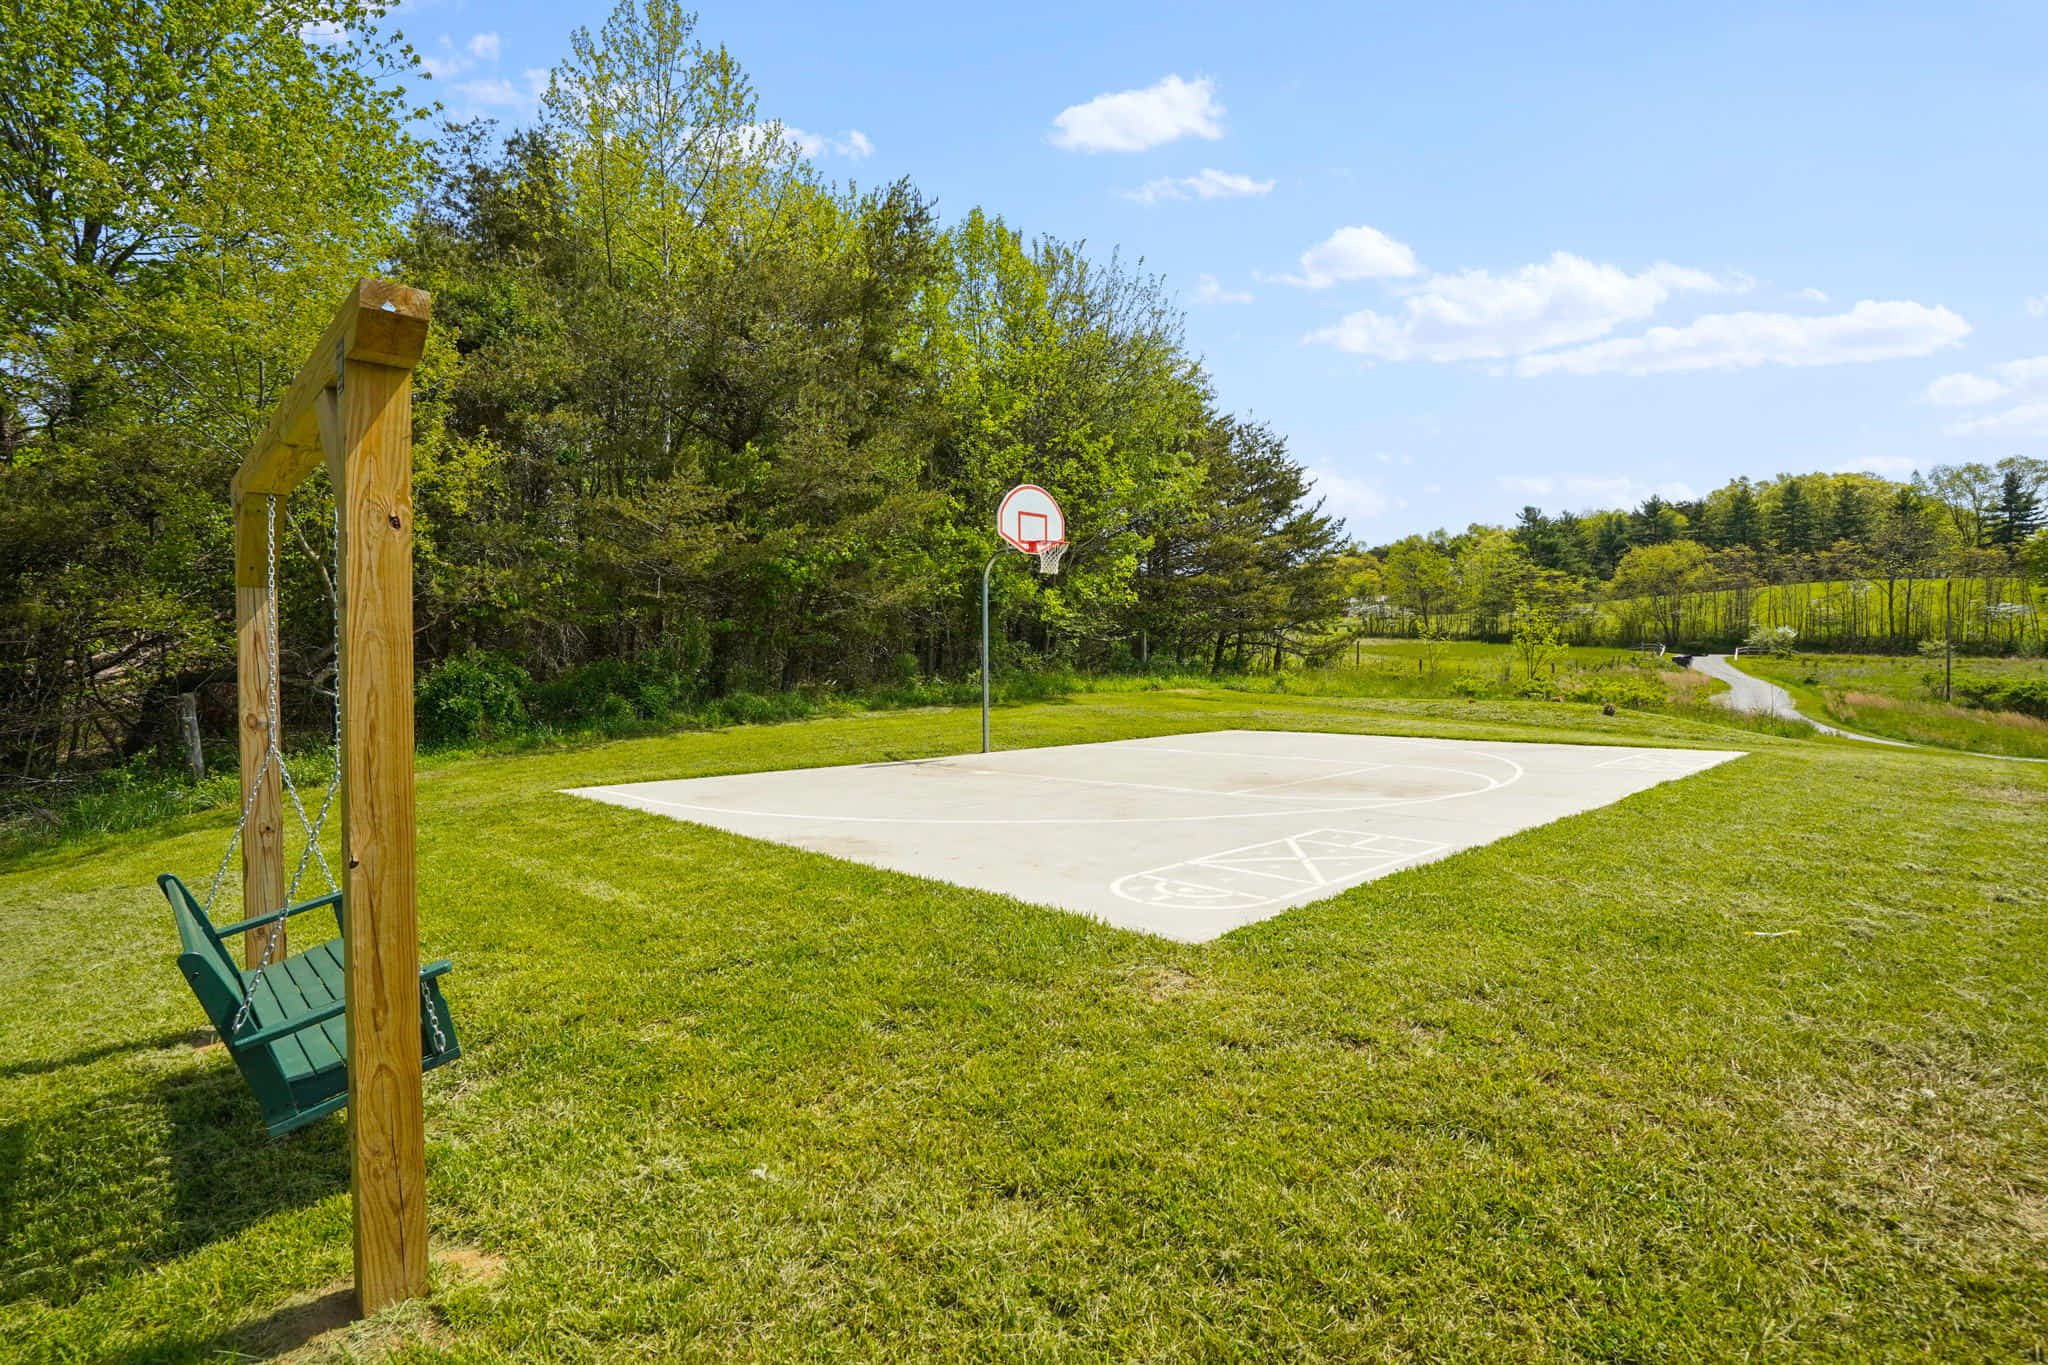 Basketball court for River Rock Lodge in Hocking Hills Ohio